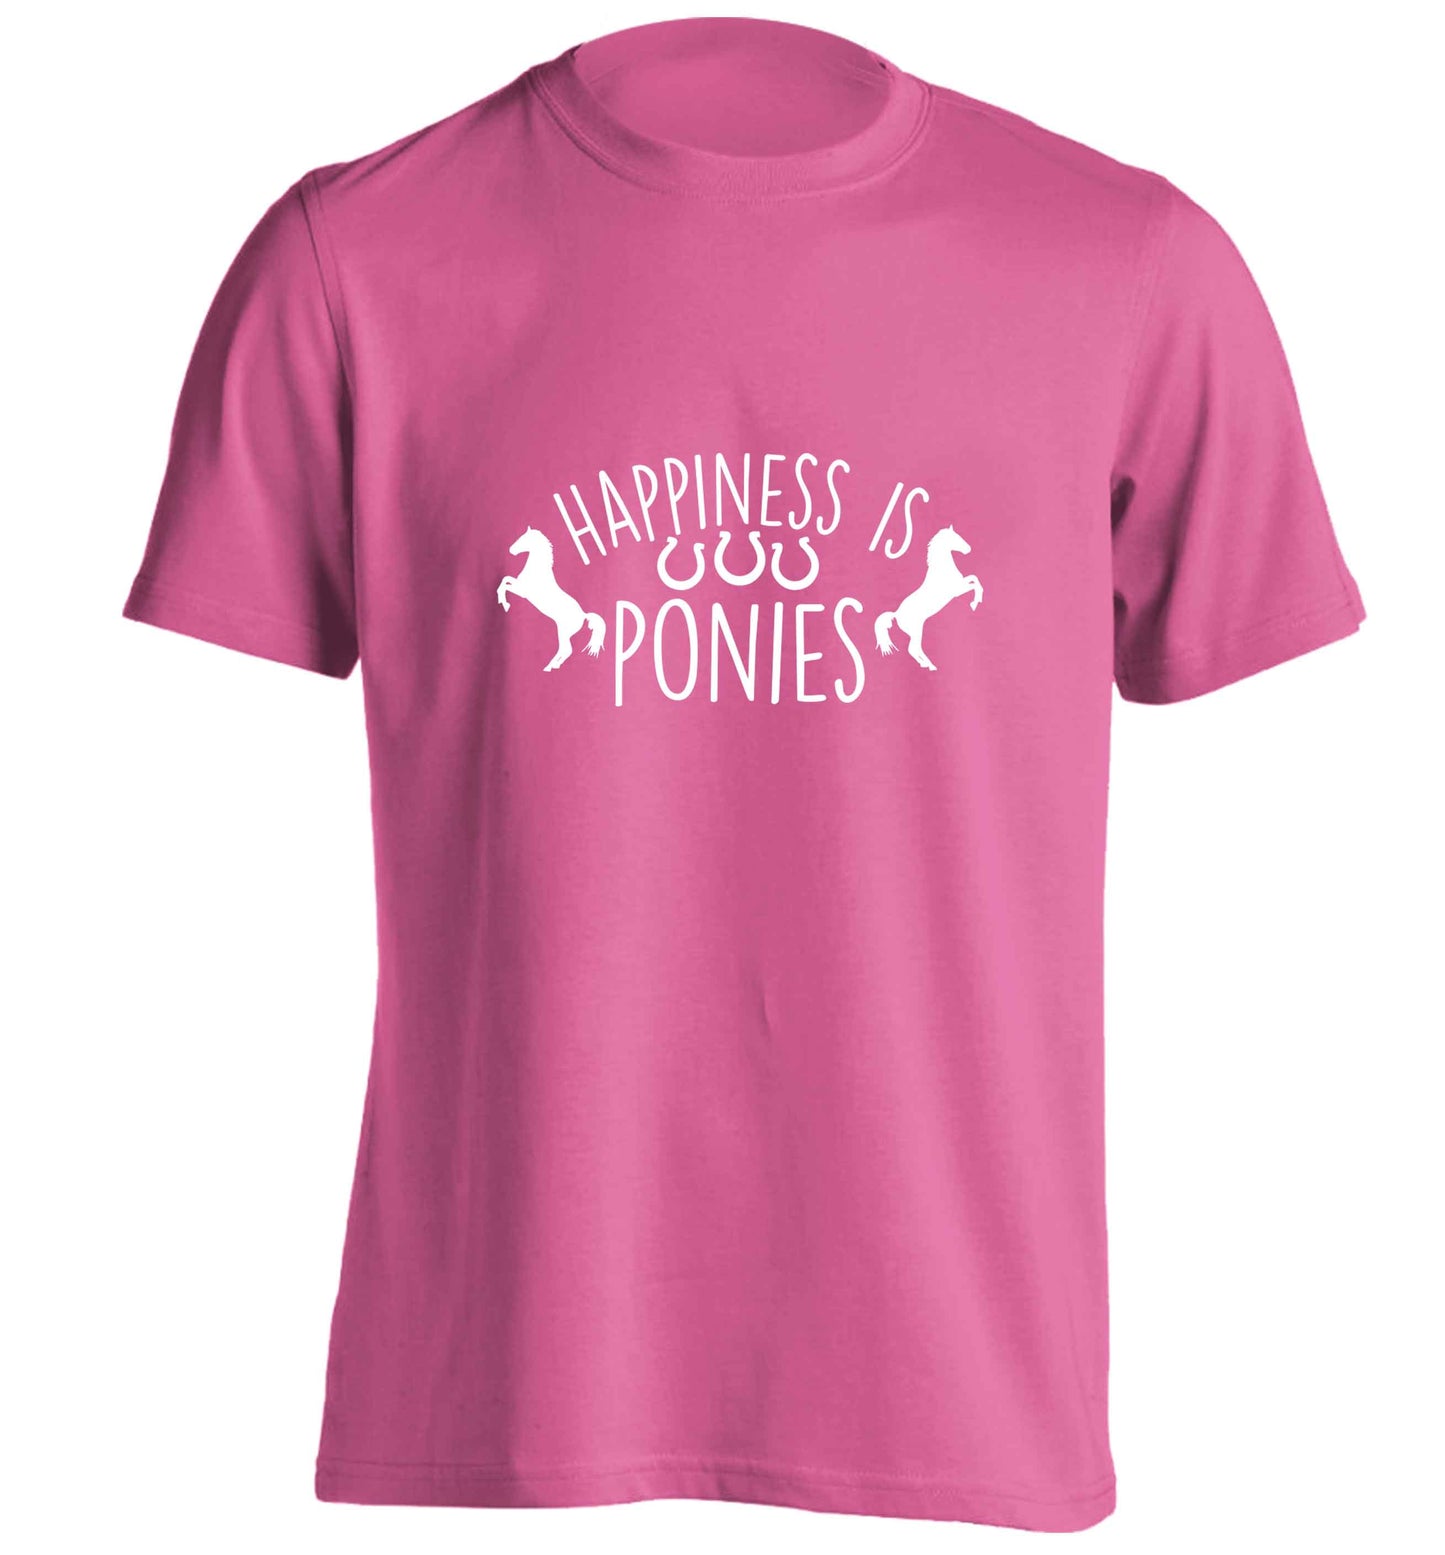 Happiness is ponies adults unisex pink Tshirt 2XL